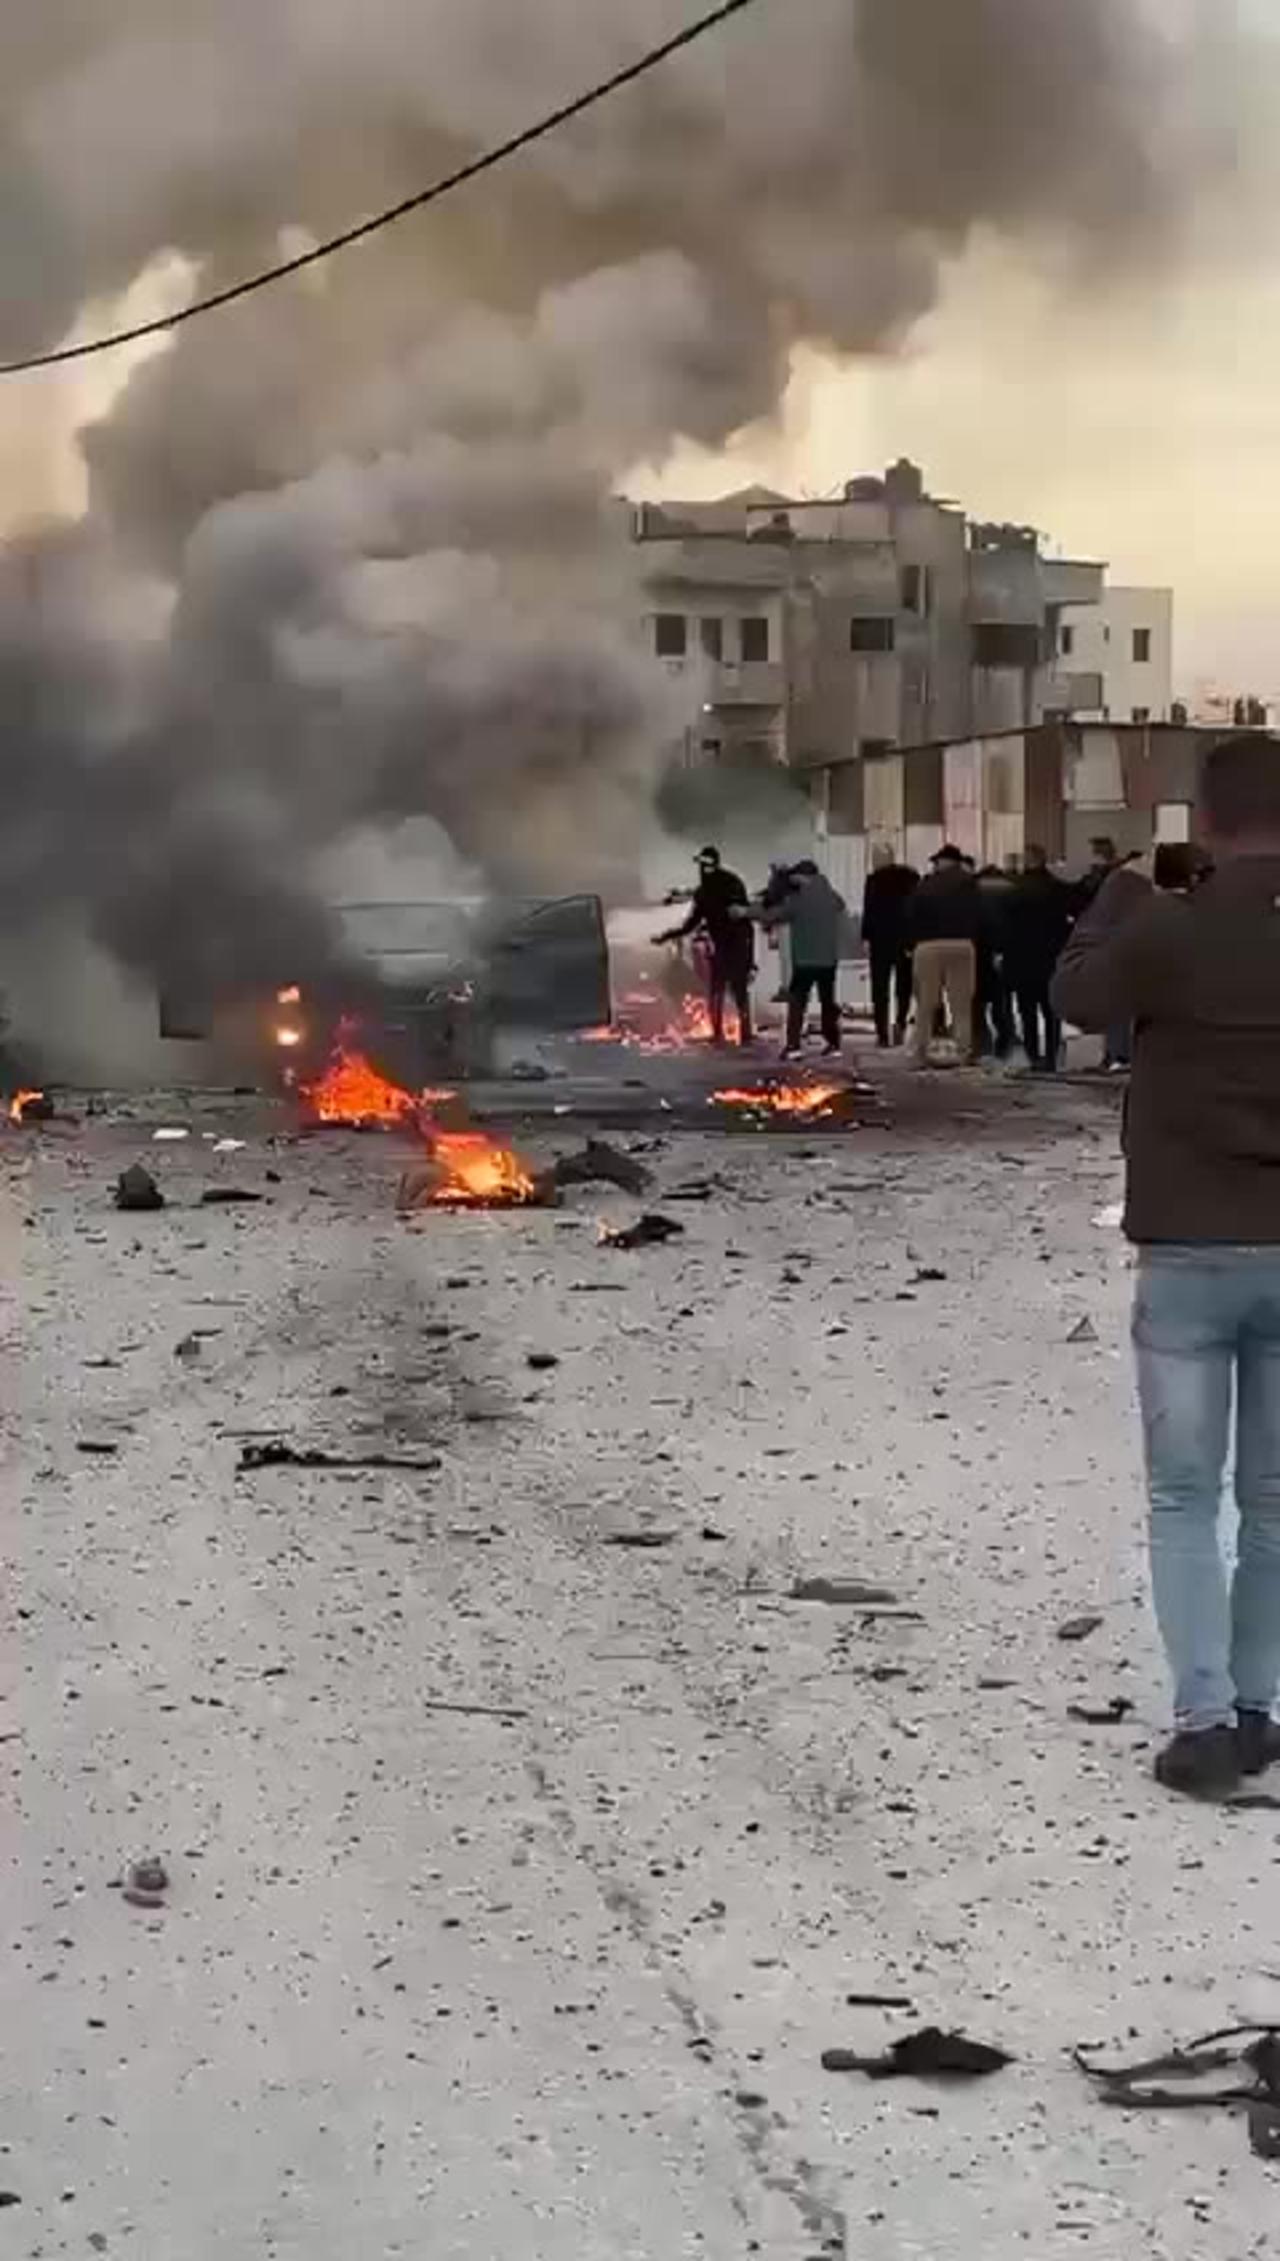 Palestinian media reporting an Israeli airstrike against a vehicle in the West Bank